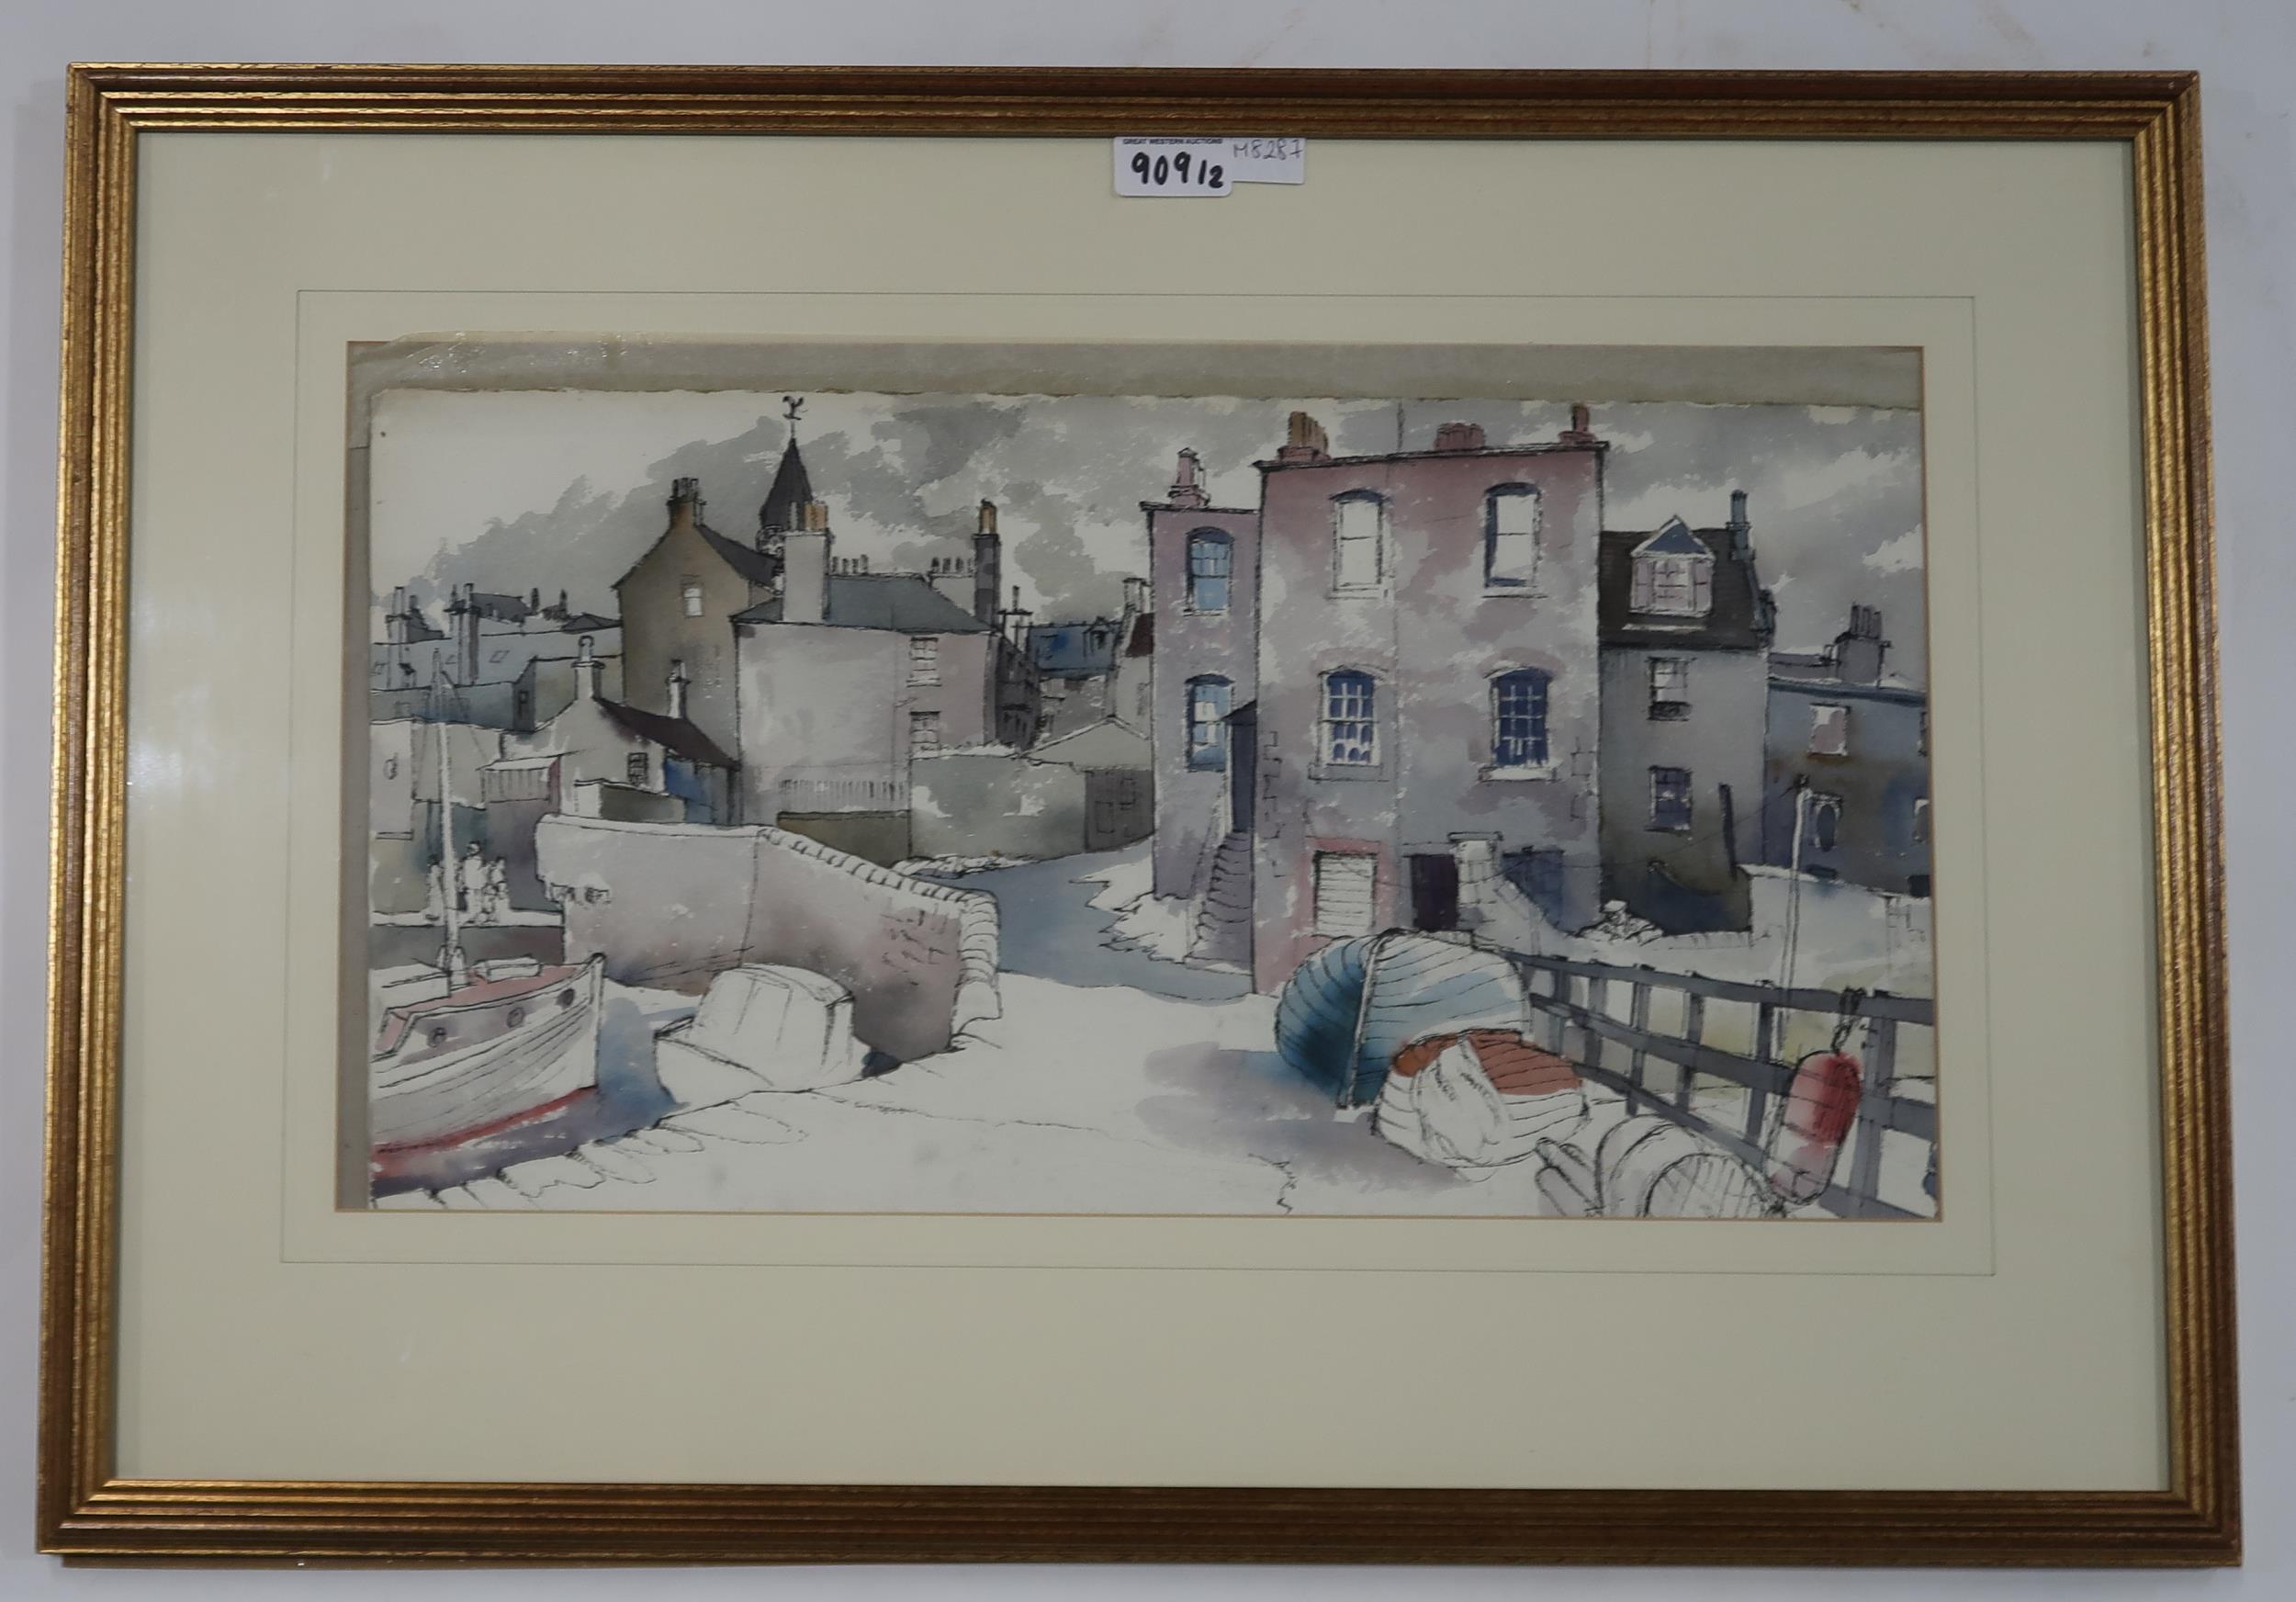 FRANK ADCROFT (SCOTTISH CONTEMPORARY)Ê HARBOUR TOWNÊ Watercolour on paper, signed, 28 x 51cmÊ - Image 3 of 4